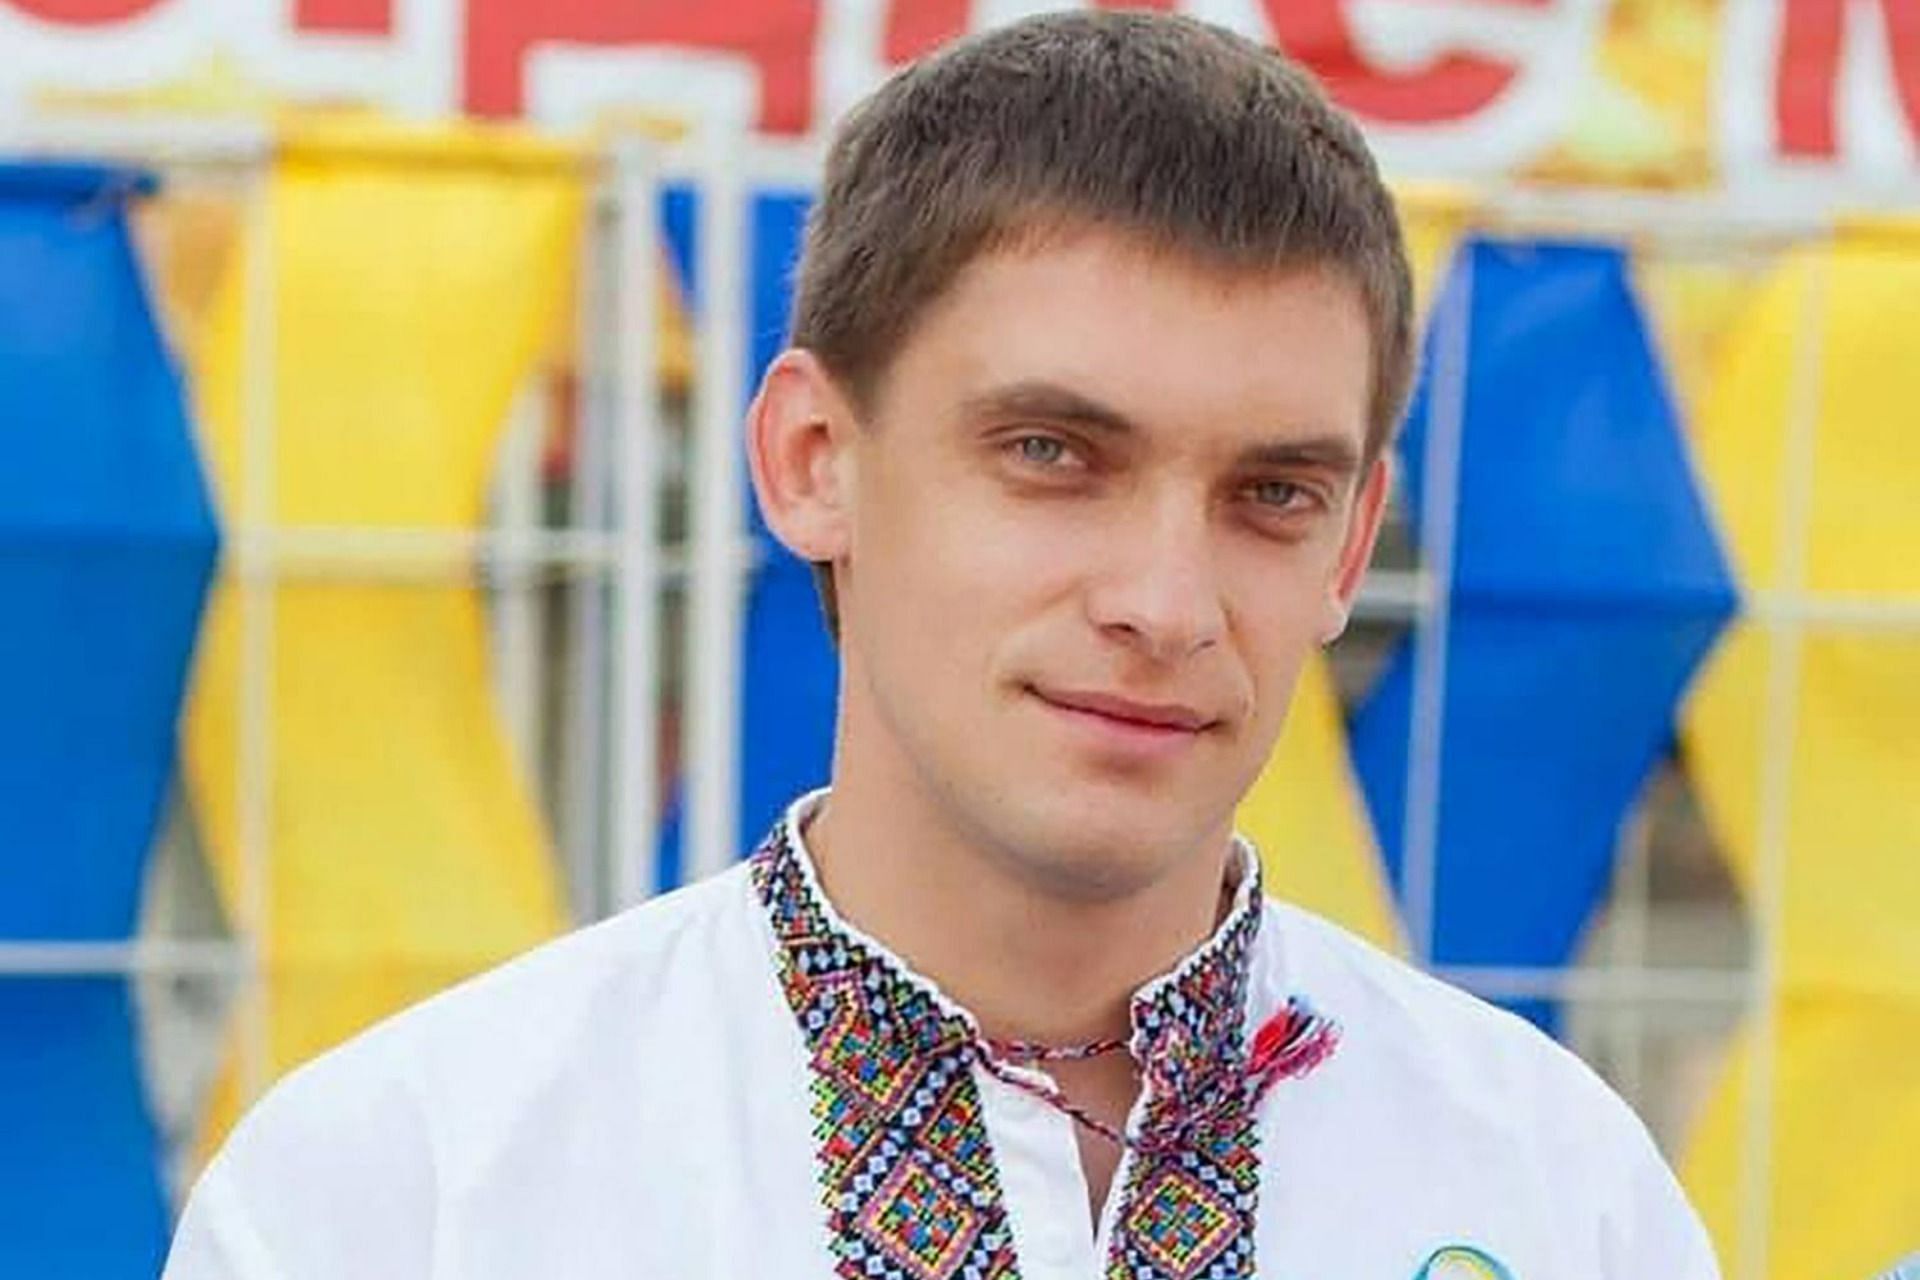 Ivan Fedorov, the mayor of Melitopol, has allegedly been kidnapped by Russian soldiers (Image via Embassy of Ukraine)